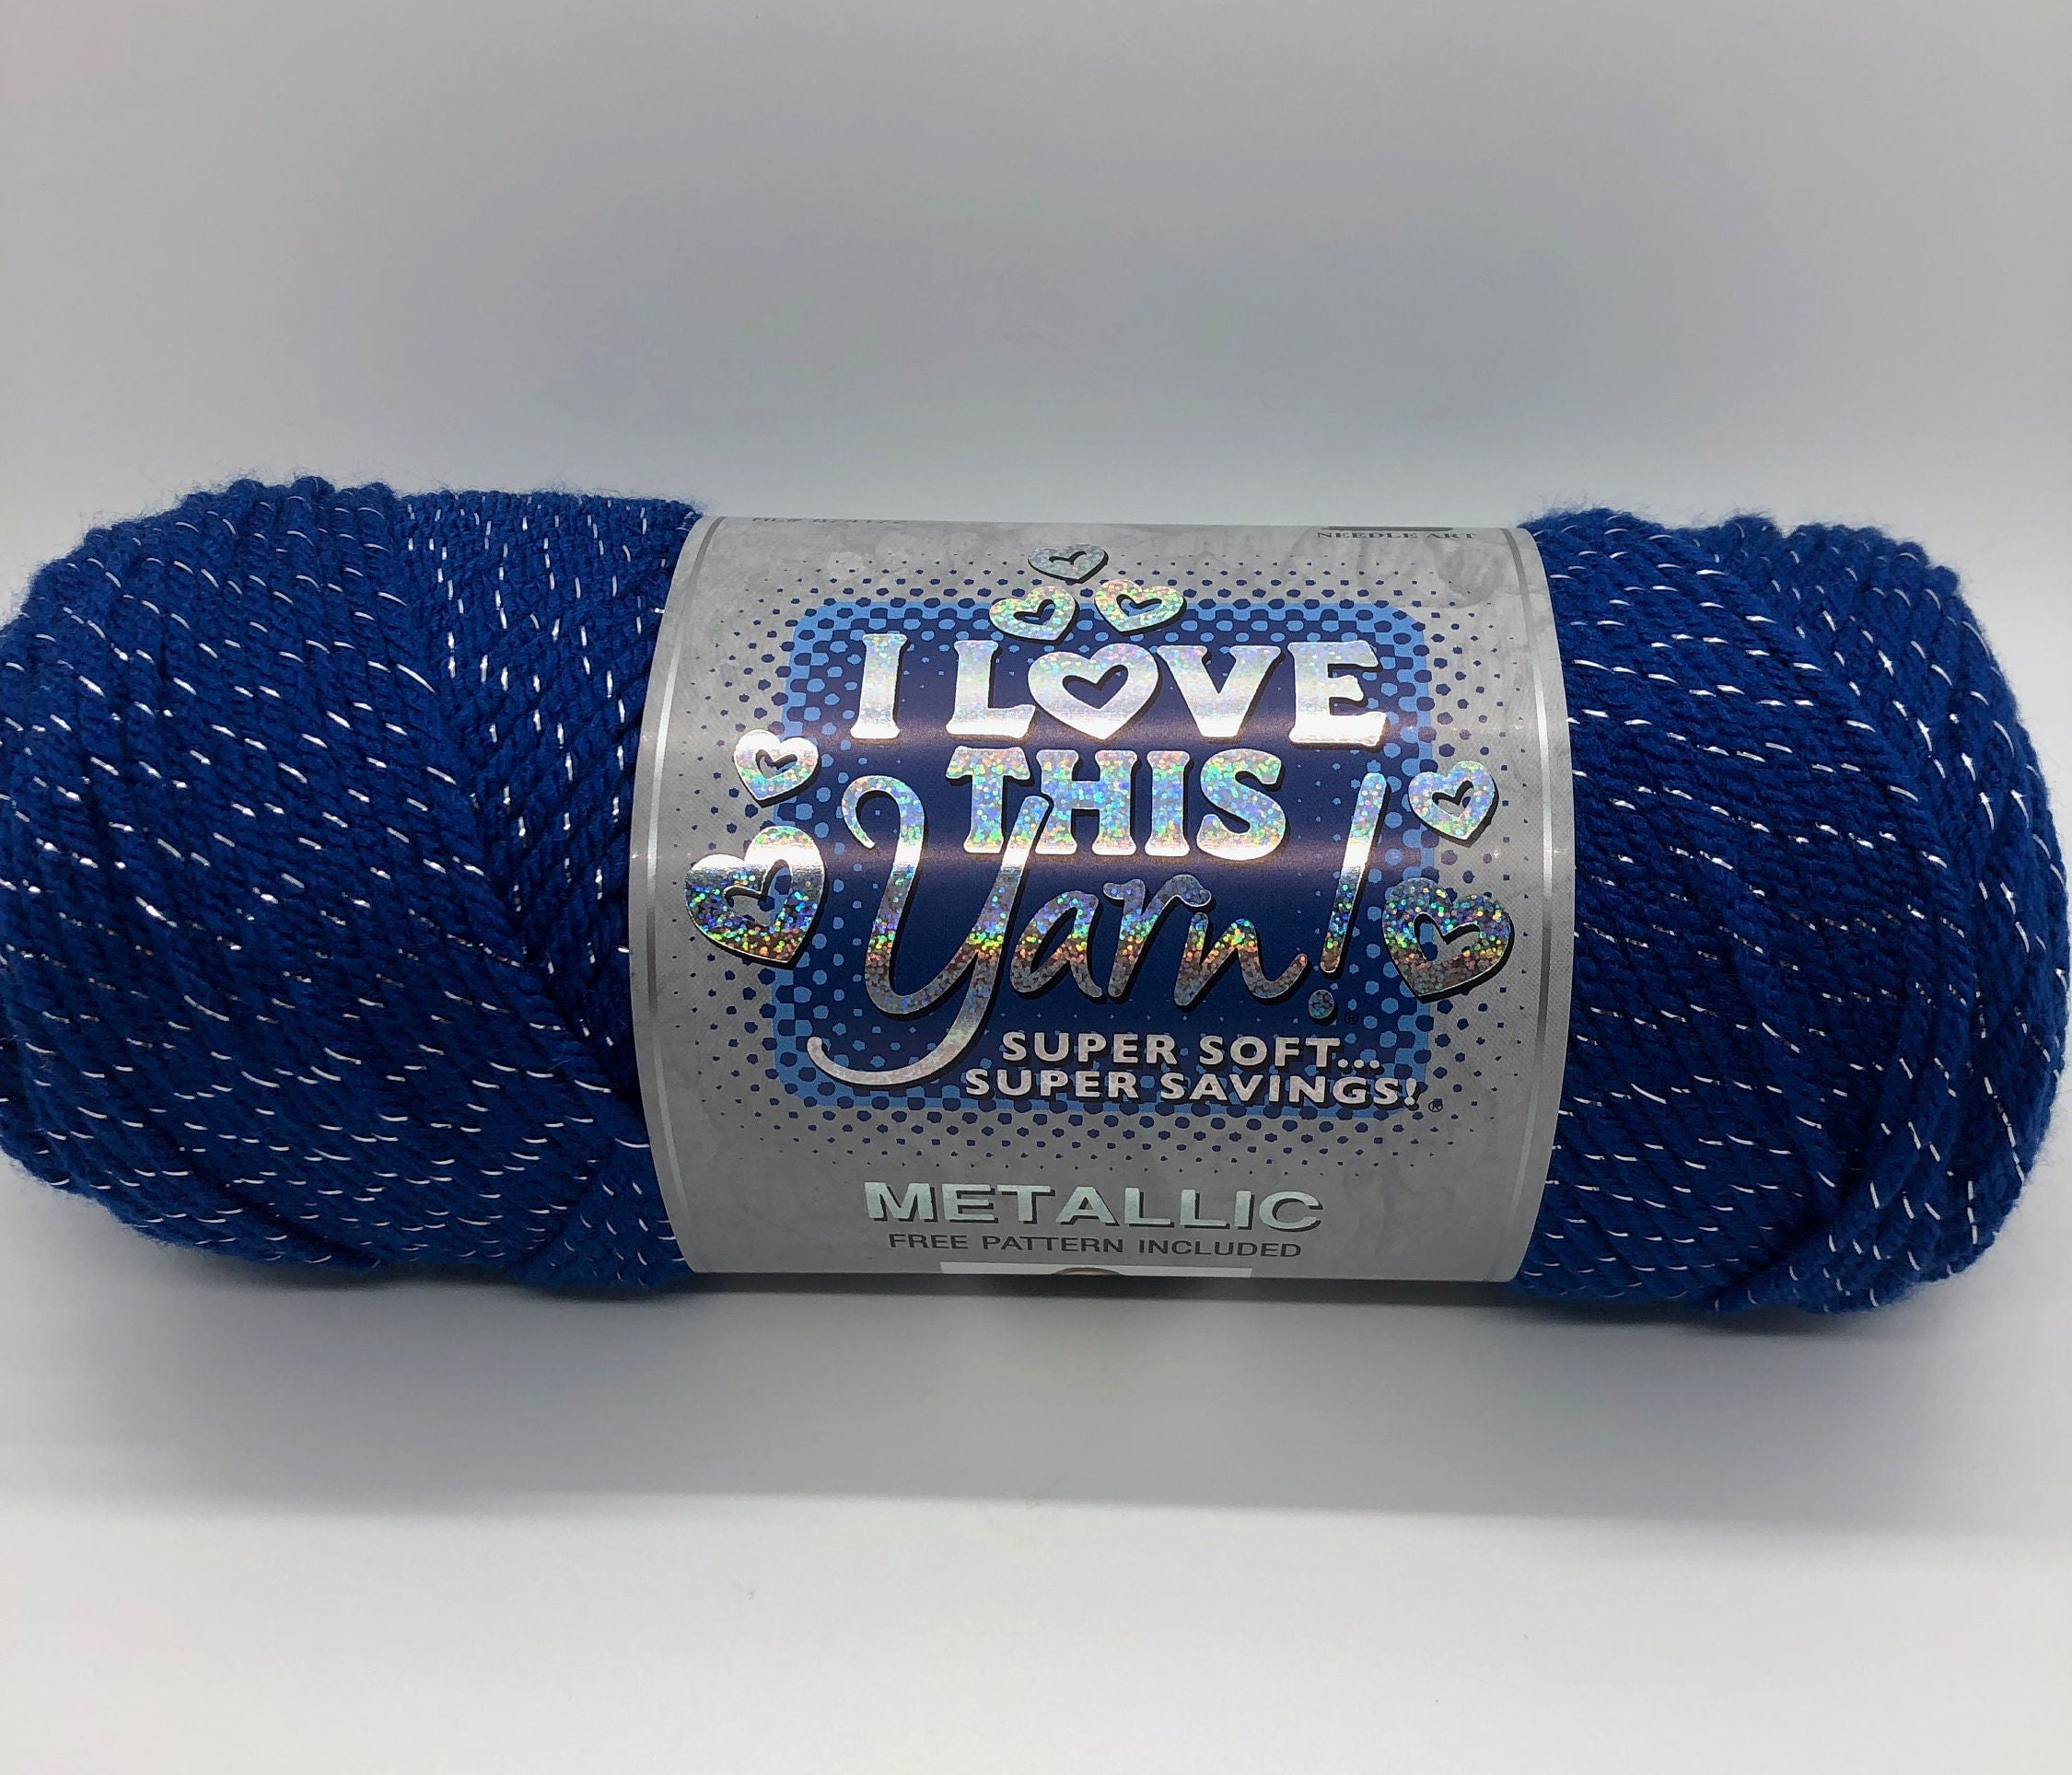 I LOVE THIS Cotton Brand Yarn Various Solid Colors! Price Per Skein $7.99 -  PicClick